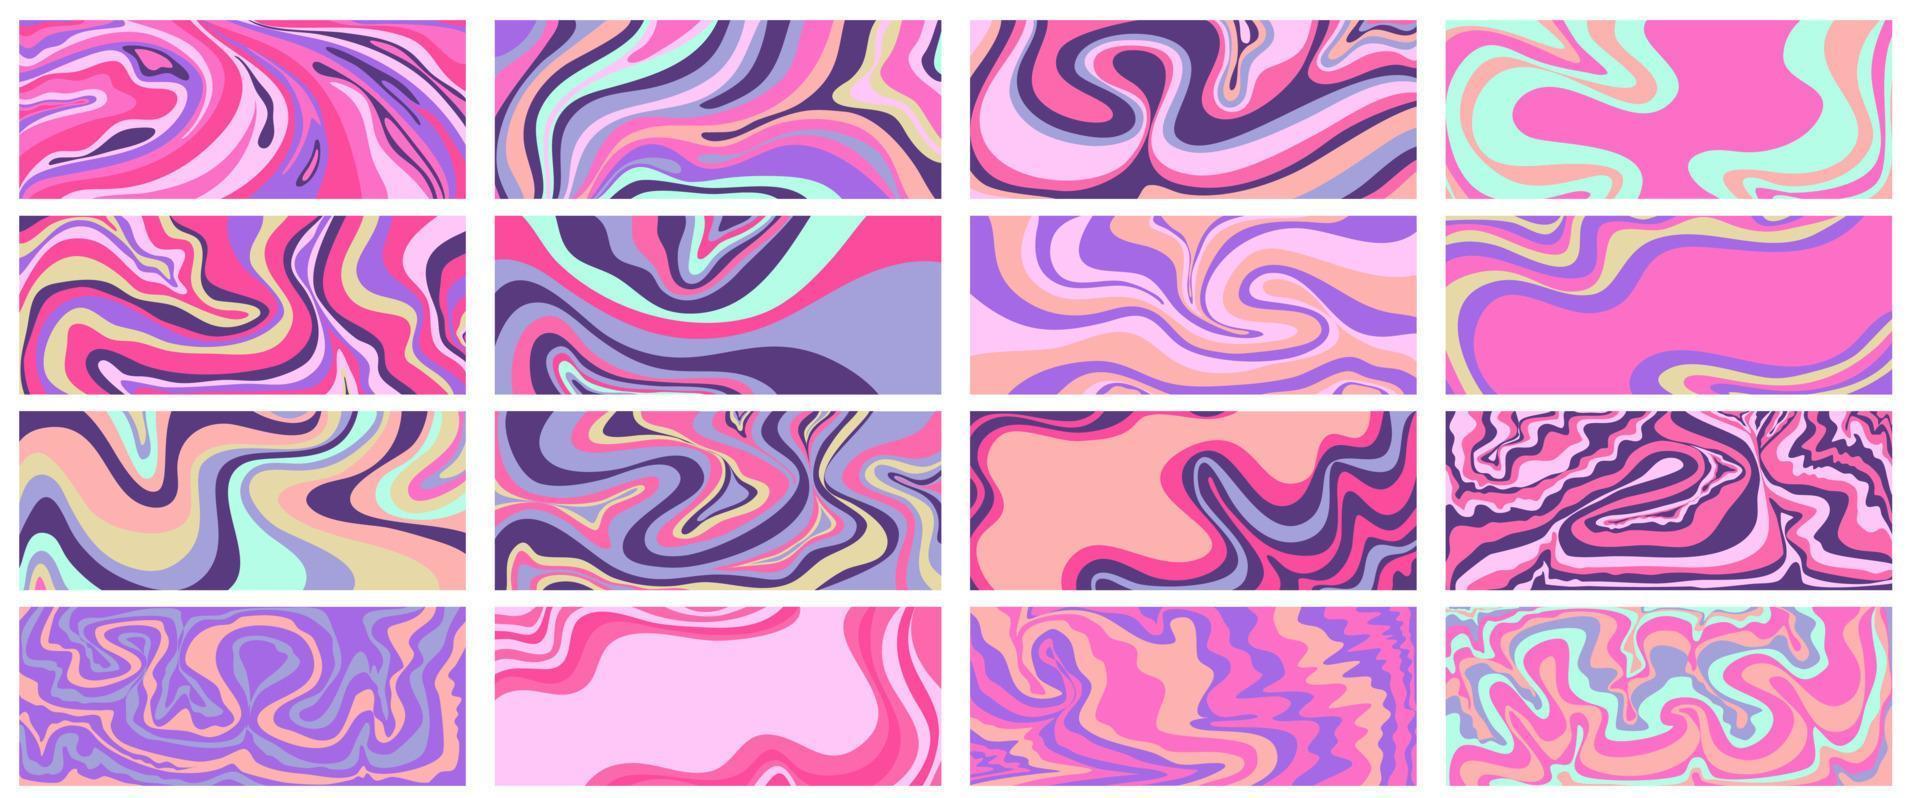 Wave y2k background set for retro design. Liquid groovy marble pink background. Purple y2k pattern in modern style pink. Psychedelic retro wave wallpaper. vector